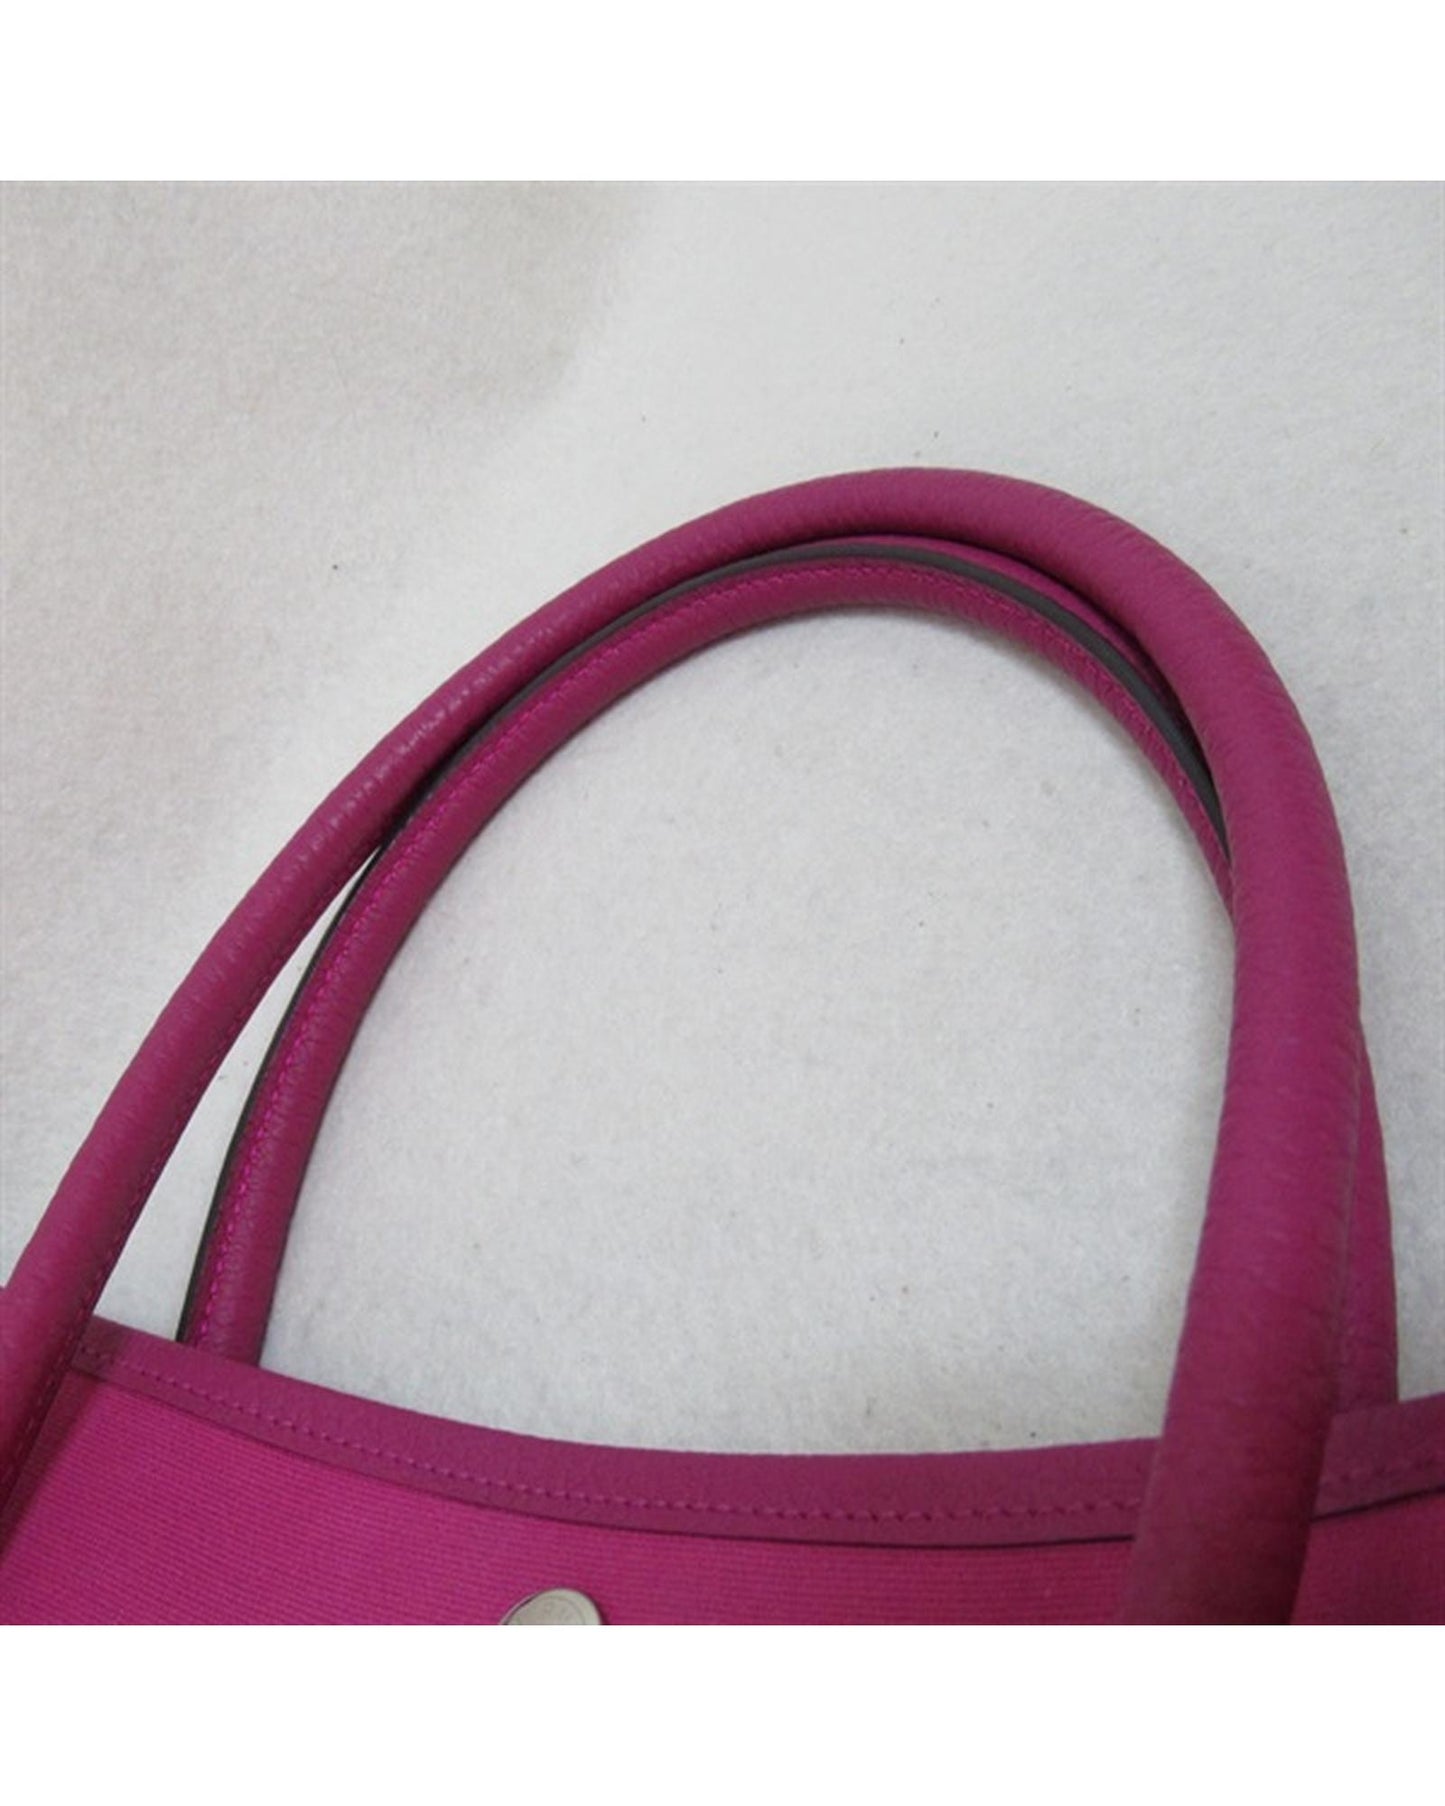 Hermes Women's Excellent Condition Pink Garden Party PM Bag in Pink